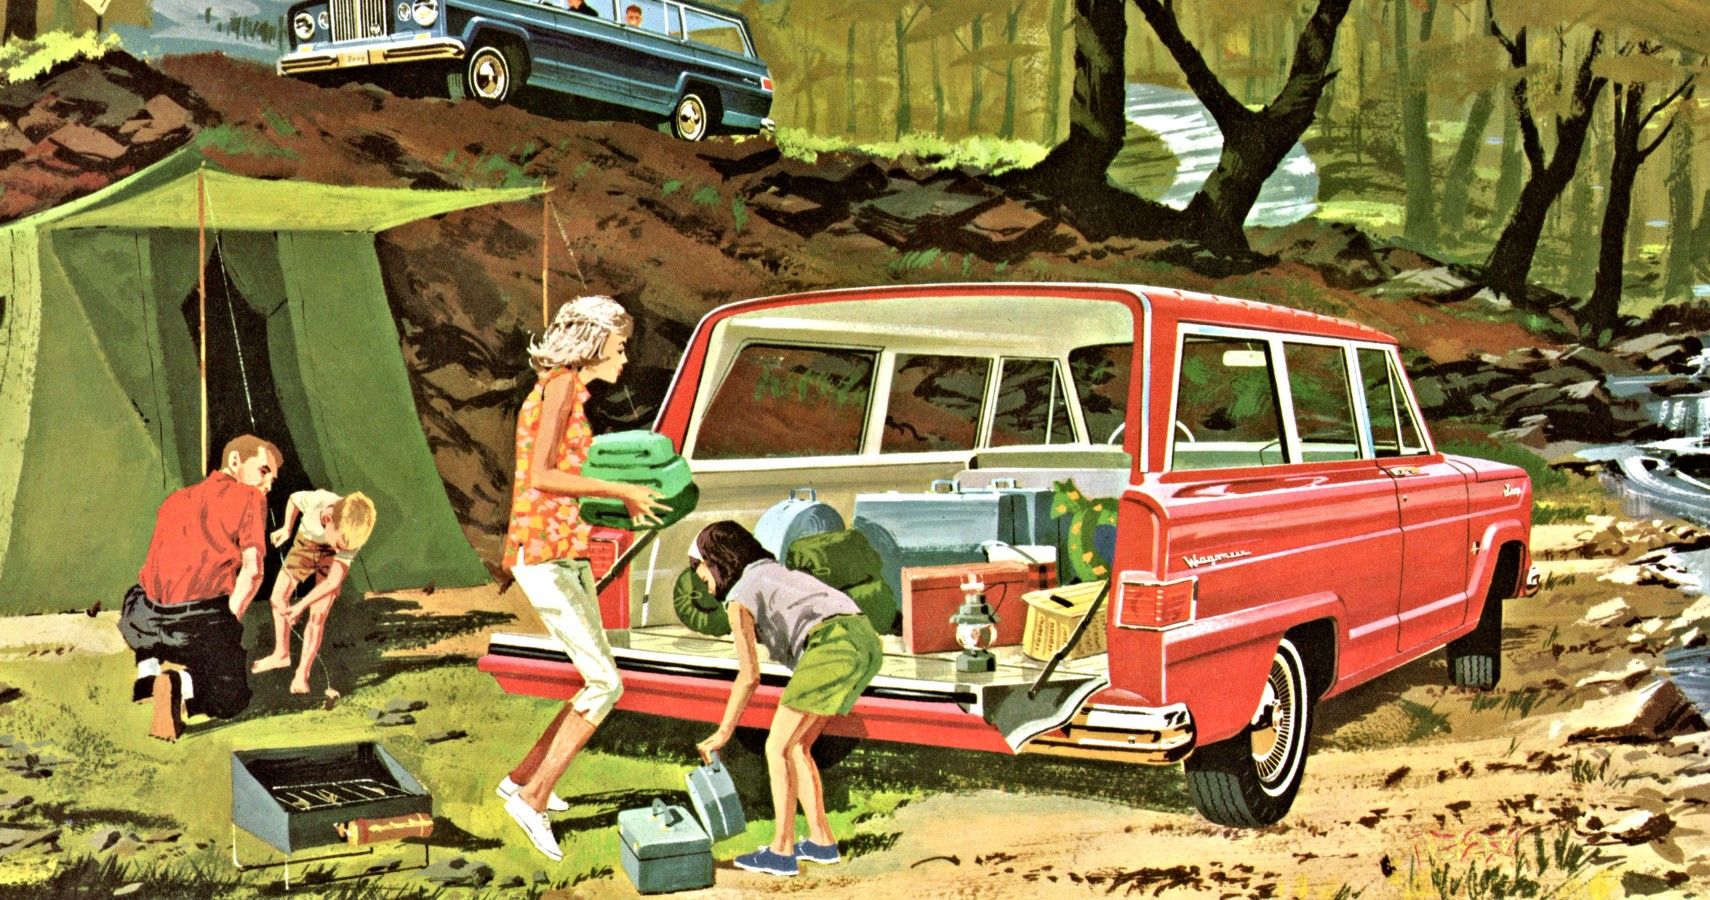 1963 Jeep Wagoneer used by a family for weekend off-roading